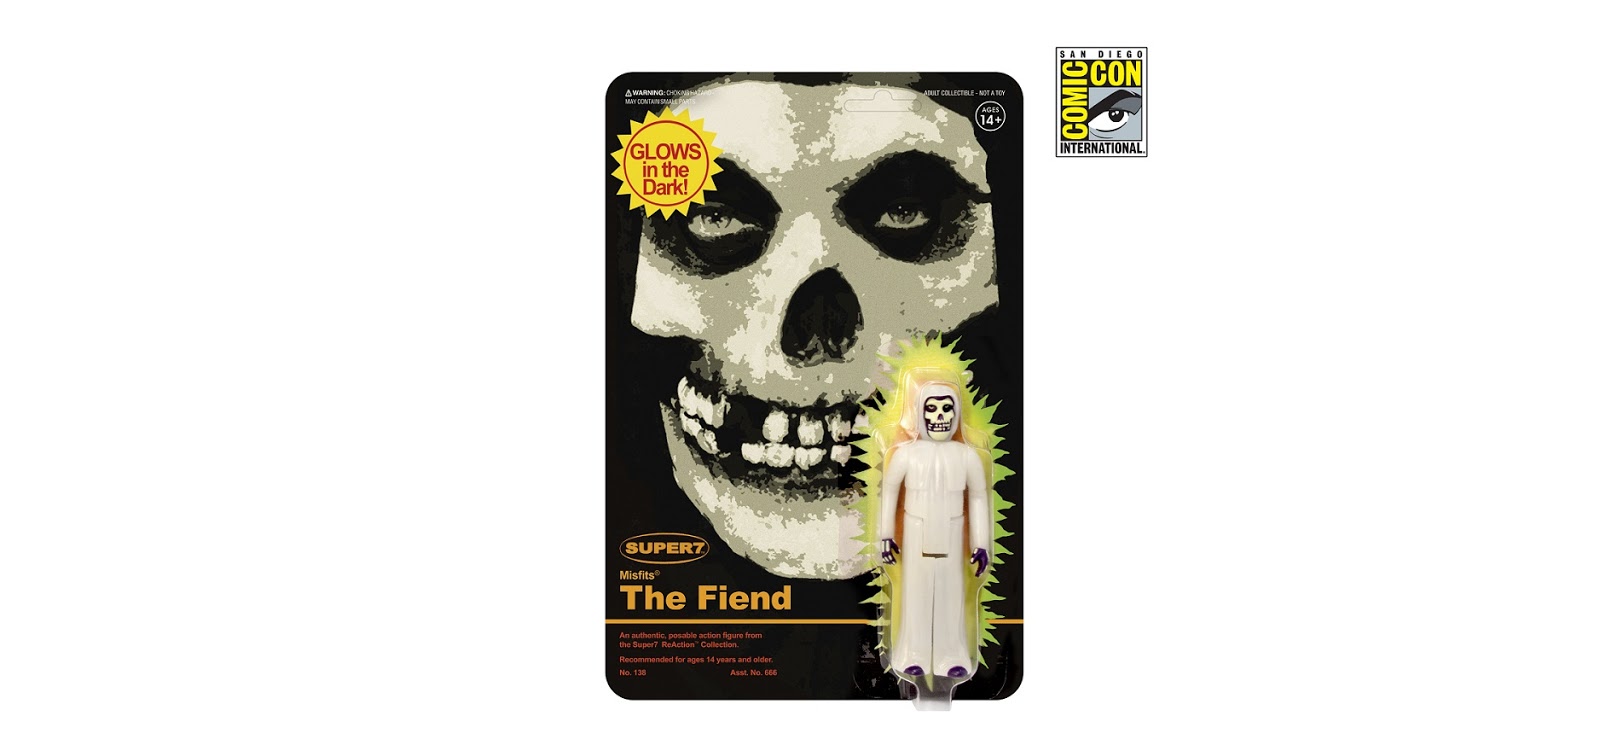 THE MISFITS 'Midnight Black’ Misfits Fiend 3.75" ReAction Figure Super7 SOLD OUT 